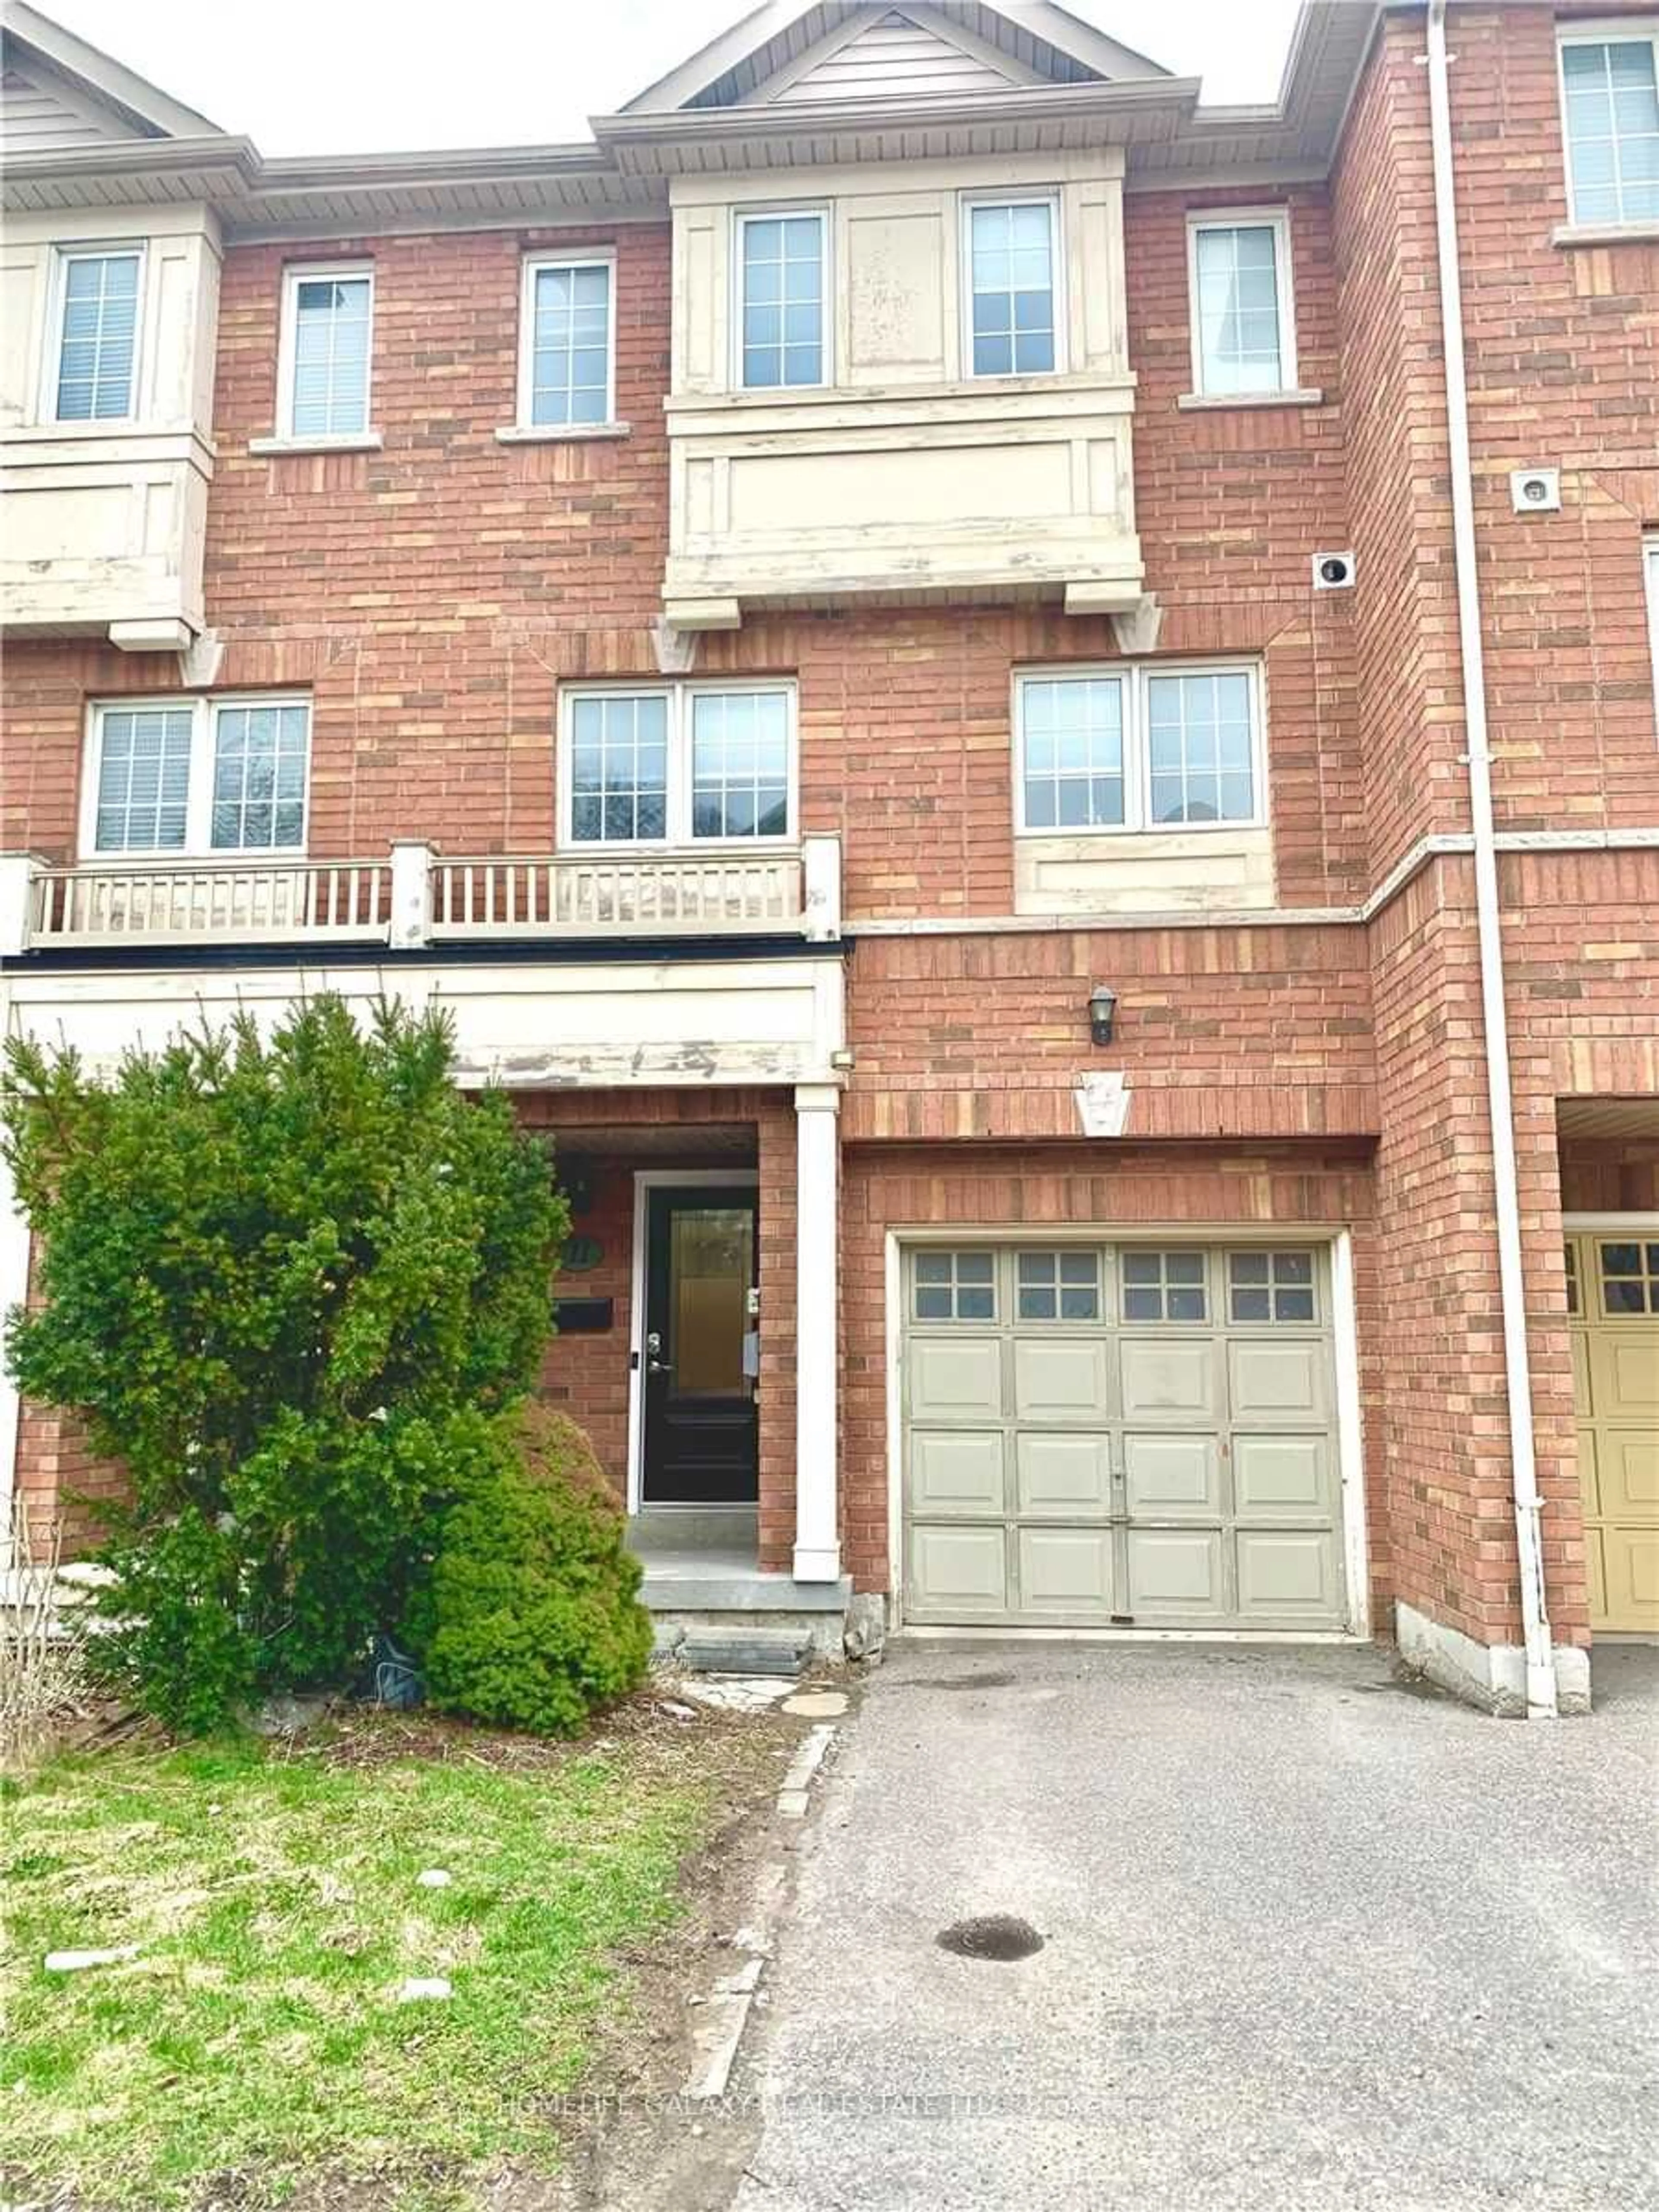 Home with unknown exterior material for 1790 Finch Ave #11, Pickering Ontario L1V 0A1